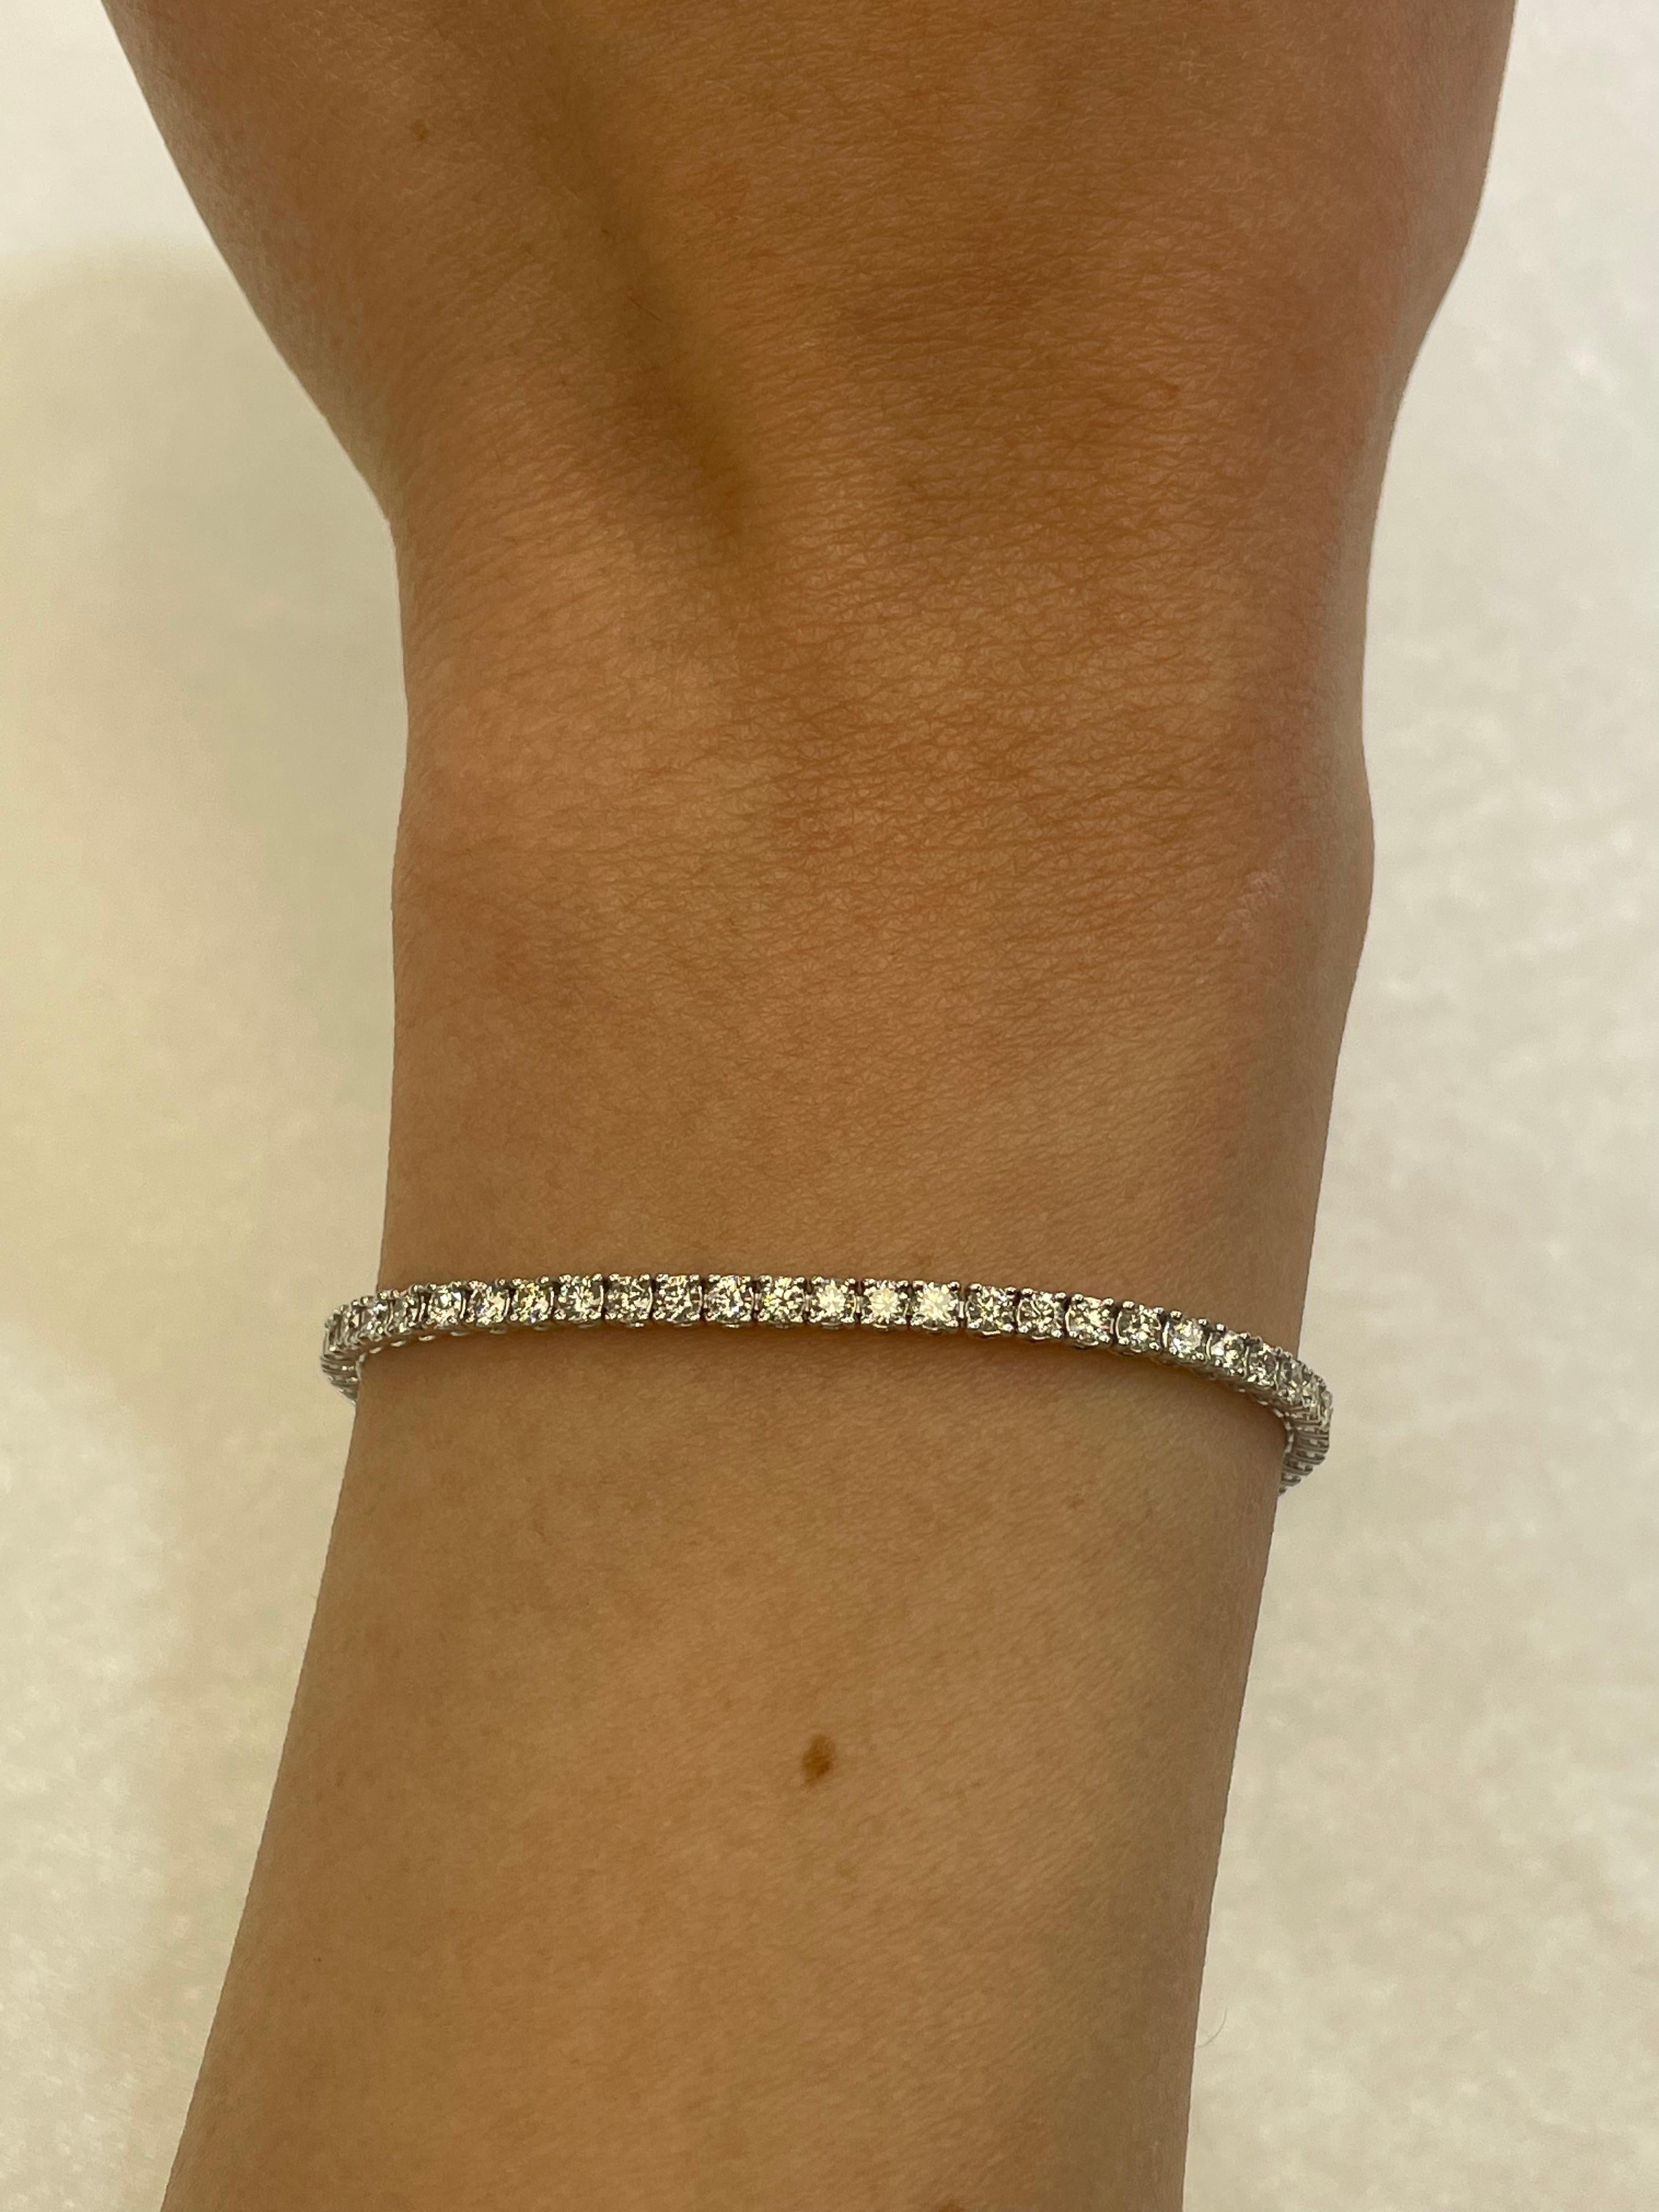 Exquisite and timeless diamonds tennis bracelet, by Alexander Beverly Hills.
74 round brilliant diamonds, 2.71 carats total. Approximately G/H color and VS clarity. Four prong set in 14k white gold, 6.84 grams, 7 inches. 
Accommodated with an up to